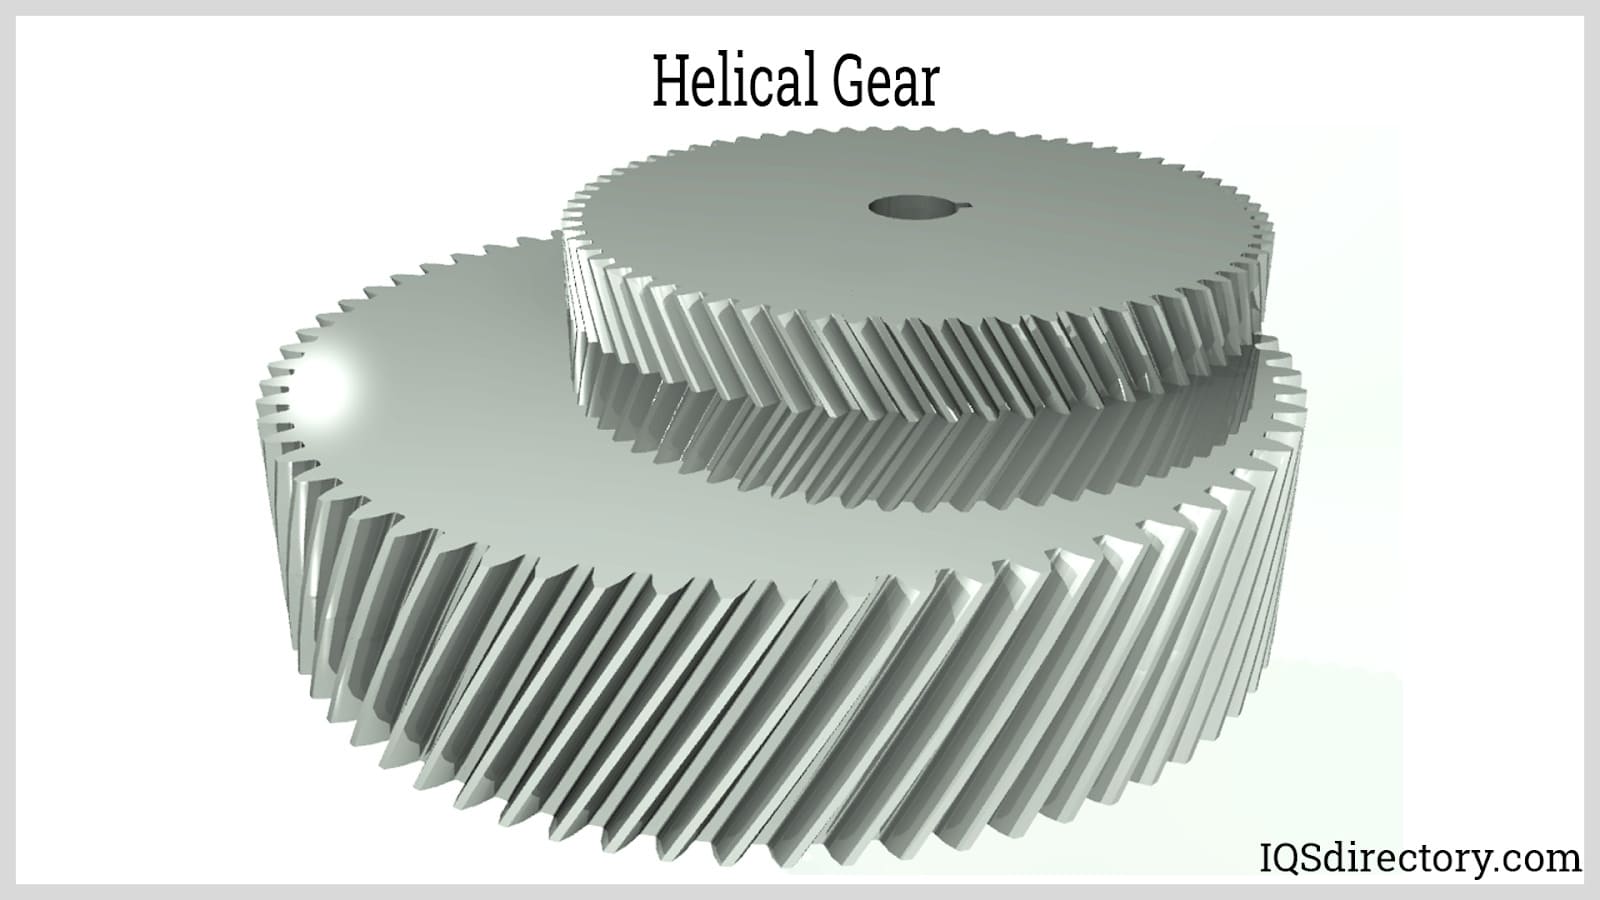 Helical Gear from Cleveland Gear Company